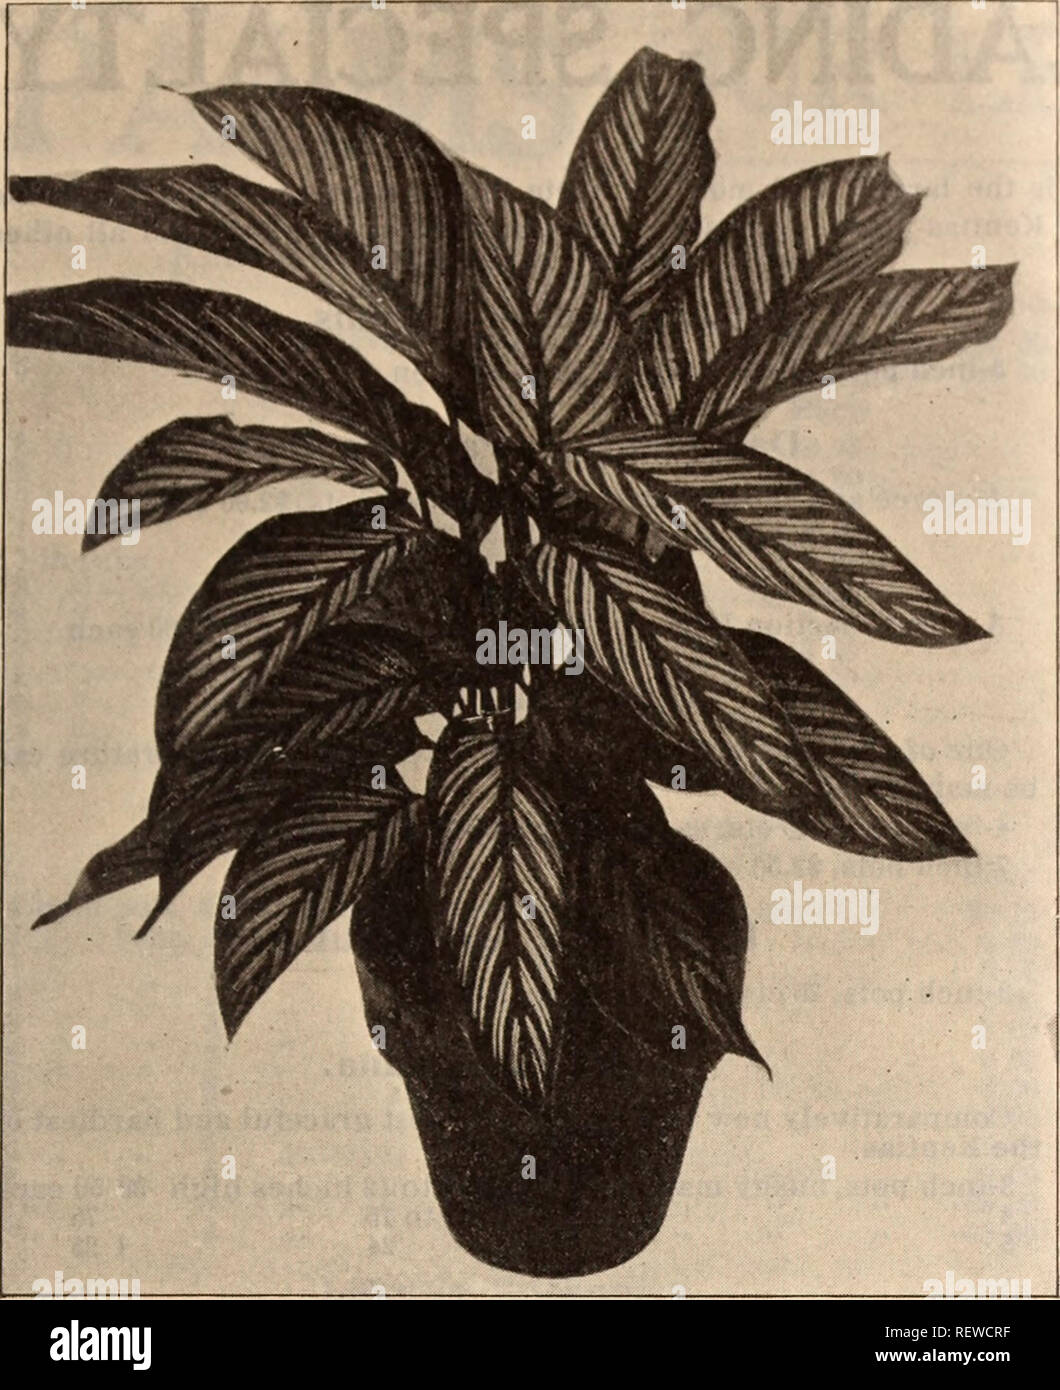 . Dreer's wholesale price list / Henry A. Dreer.. Nursery Catalogue. HENRY A. DREER, PHILADELPHIA, PA., WHOLESALE PRICE LIST 23. MARANTA VITTATA Hydrangea Otaksa. We still grow large quantities of this old favorite and we offer good 5-inch pot plants with from 3 to 5 leads at $20.00 per 100. Gardenia Florida (Cape Jasmine). 3- inch pots $1.50 per doz.; $10.00 per 100 &quot; 3.50 &quot; 25.00 Genista Fragrans. 4- inch pots $2.50 per doz.; $20.00 per 100 Dreer's Superb Gloxinias (Ready in December). Our strain of these is the finest procurable; the bulbs are well matured and of good size. We off Stock Photo